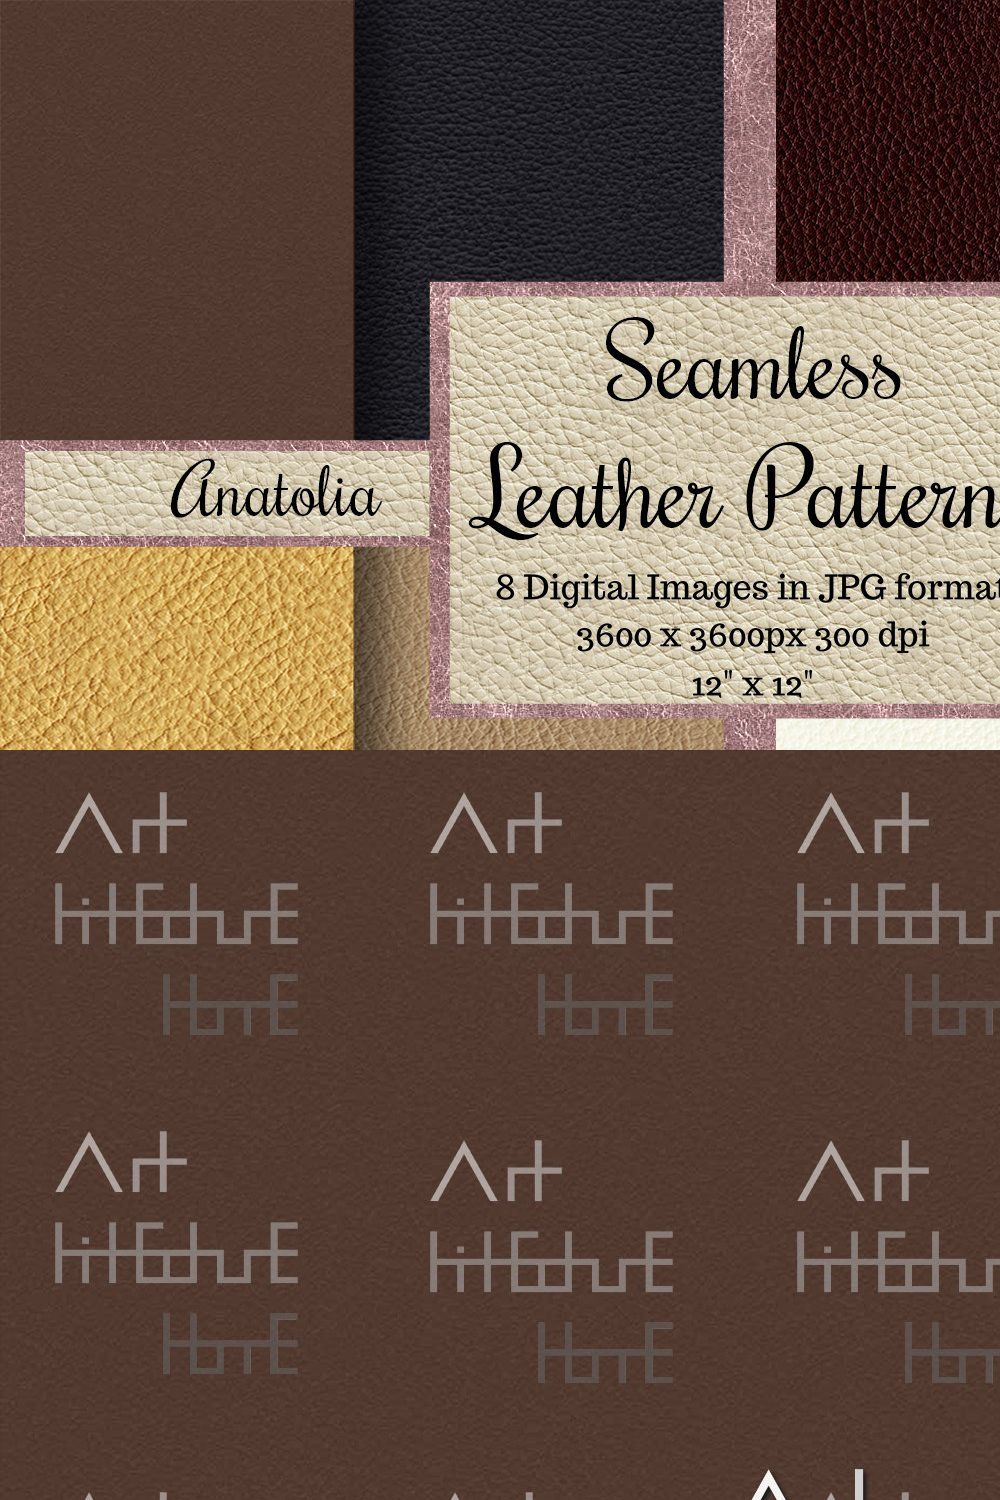 Seamless Leather Patterns Anatolia pinterest preview image.